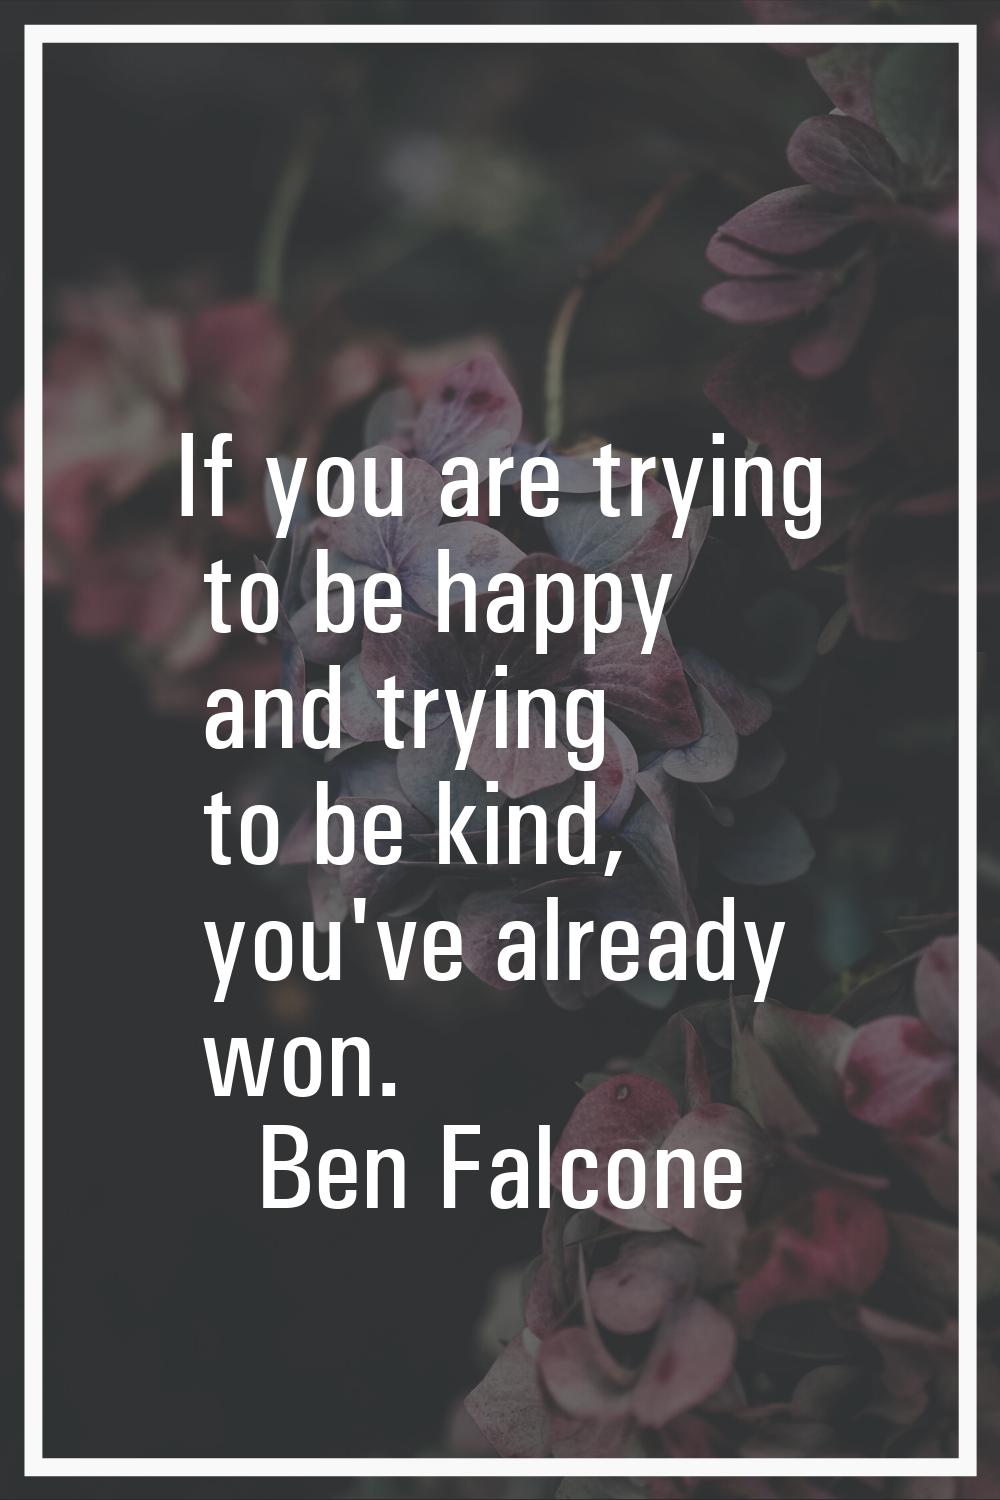 If you are trying to be happy and trying to be kind, you've already won.